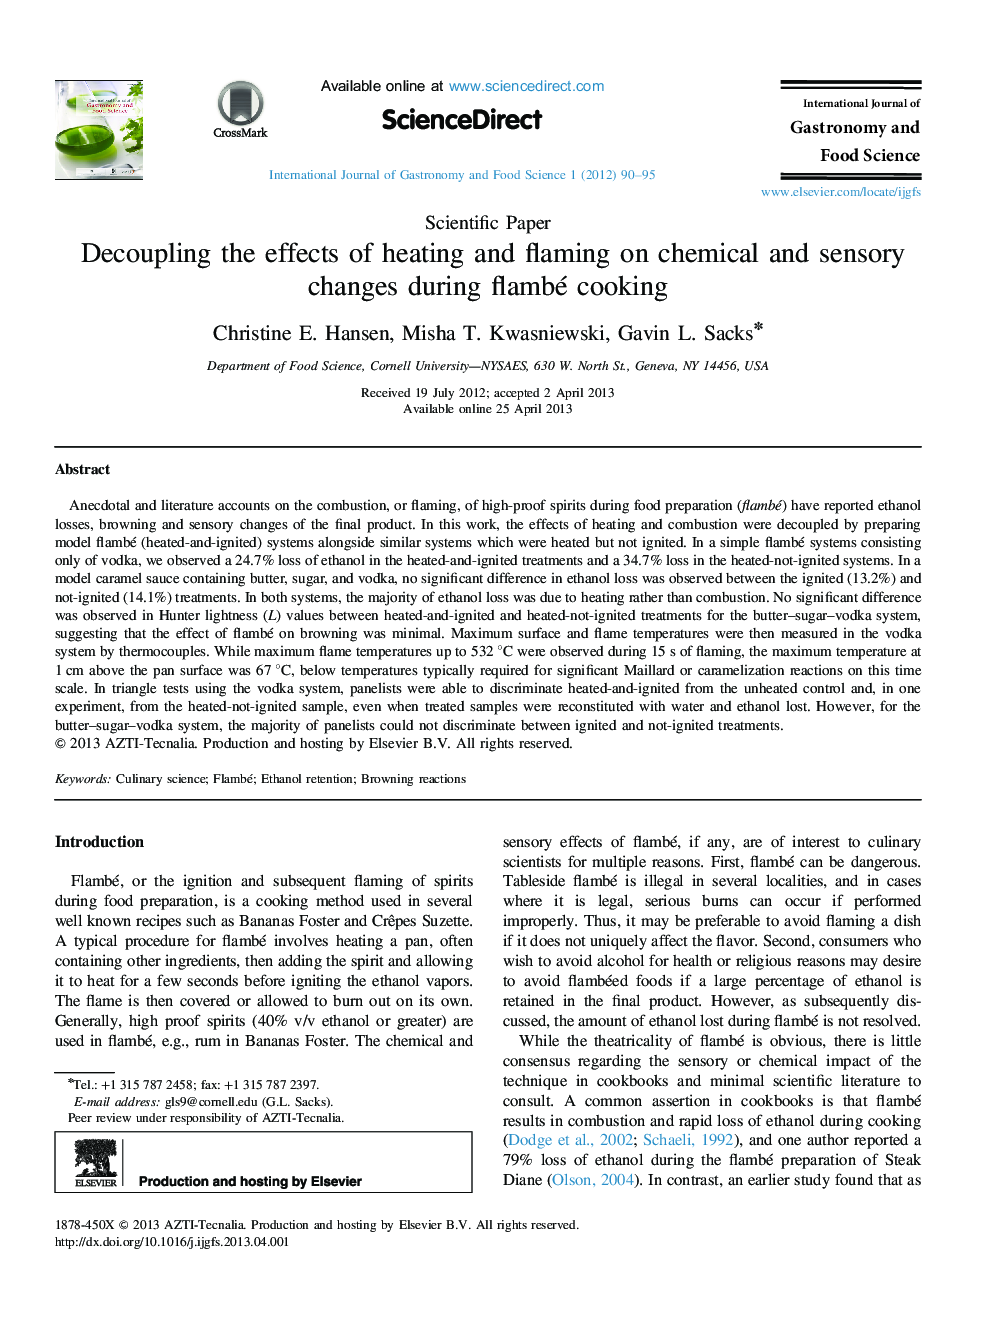 Decoupling the effects of heating and flaming on chemical and sensory changes during flambé cooking 